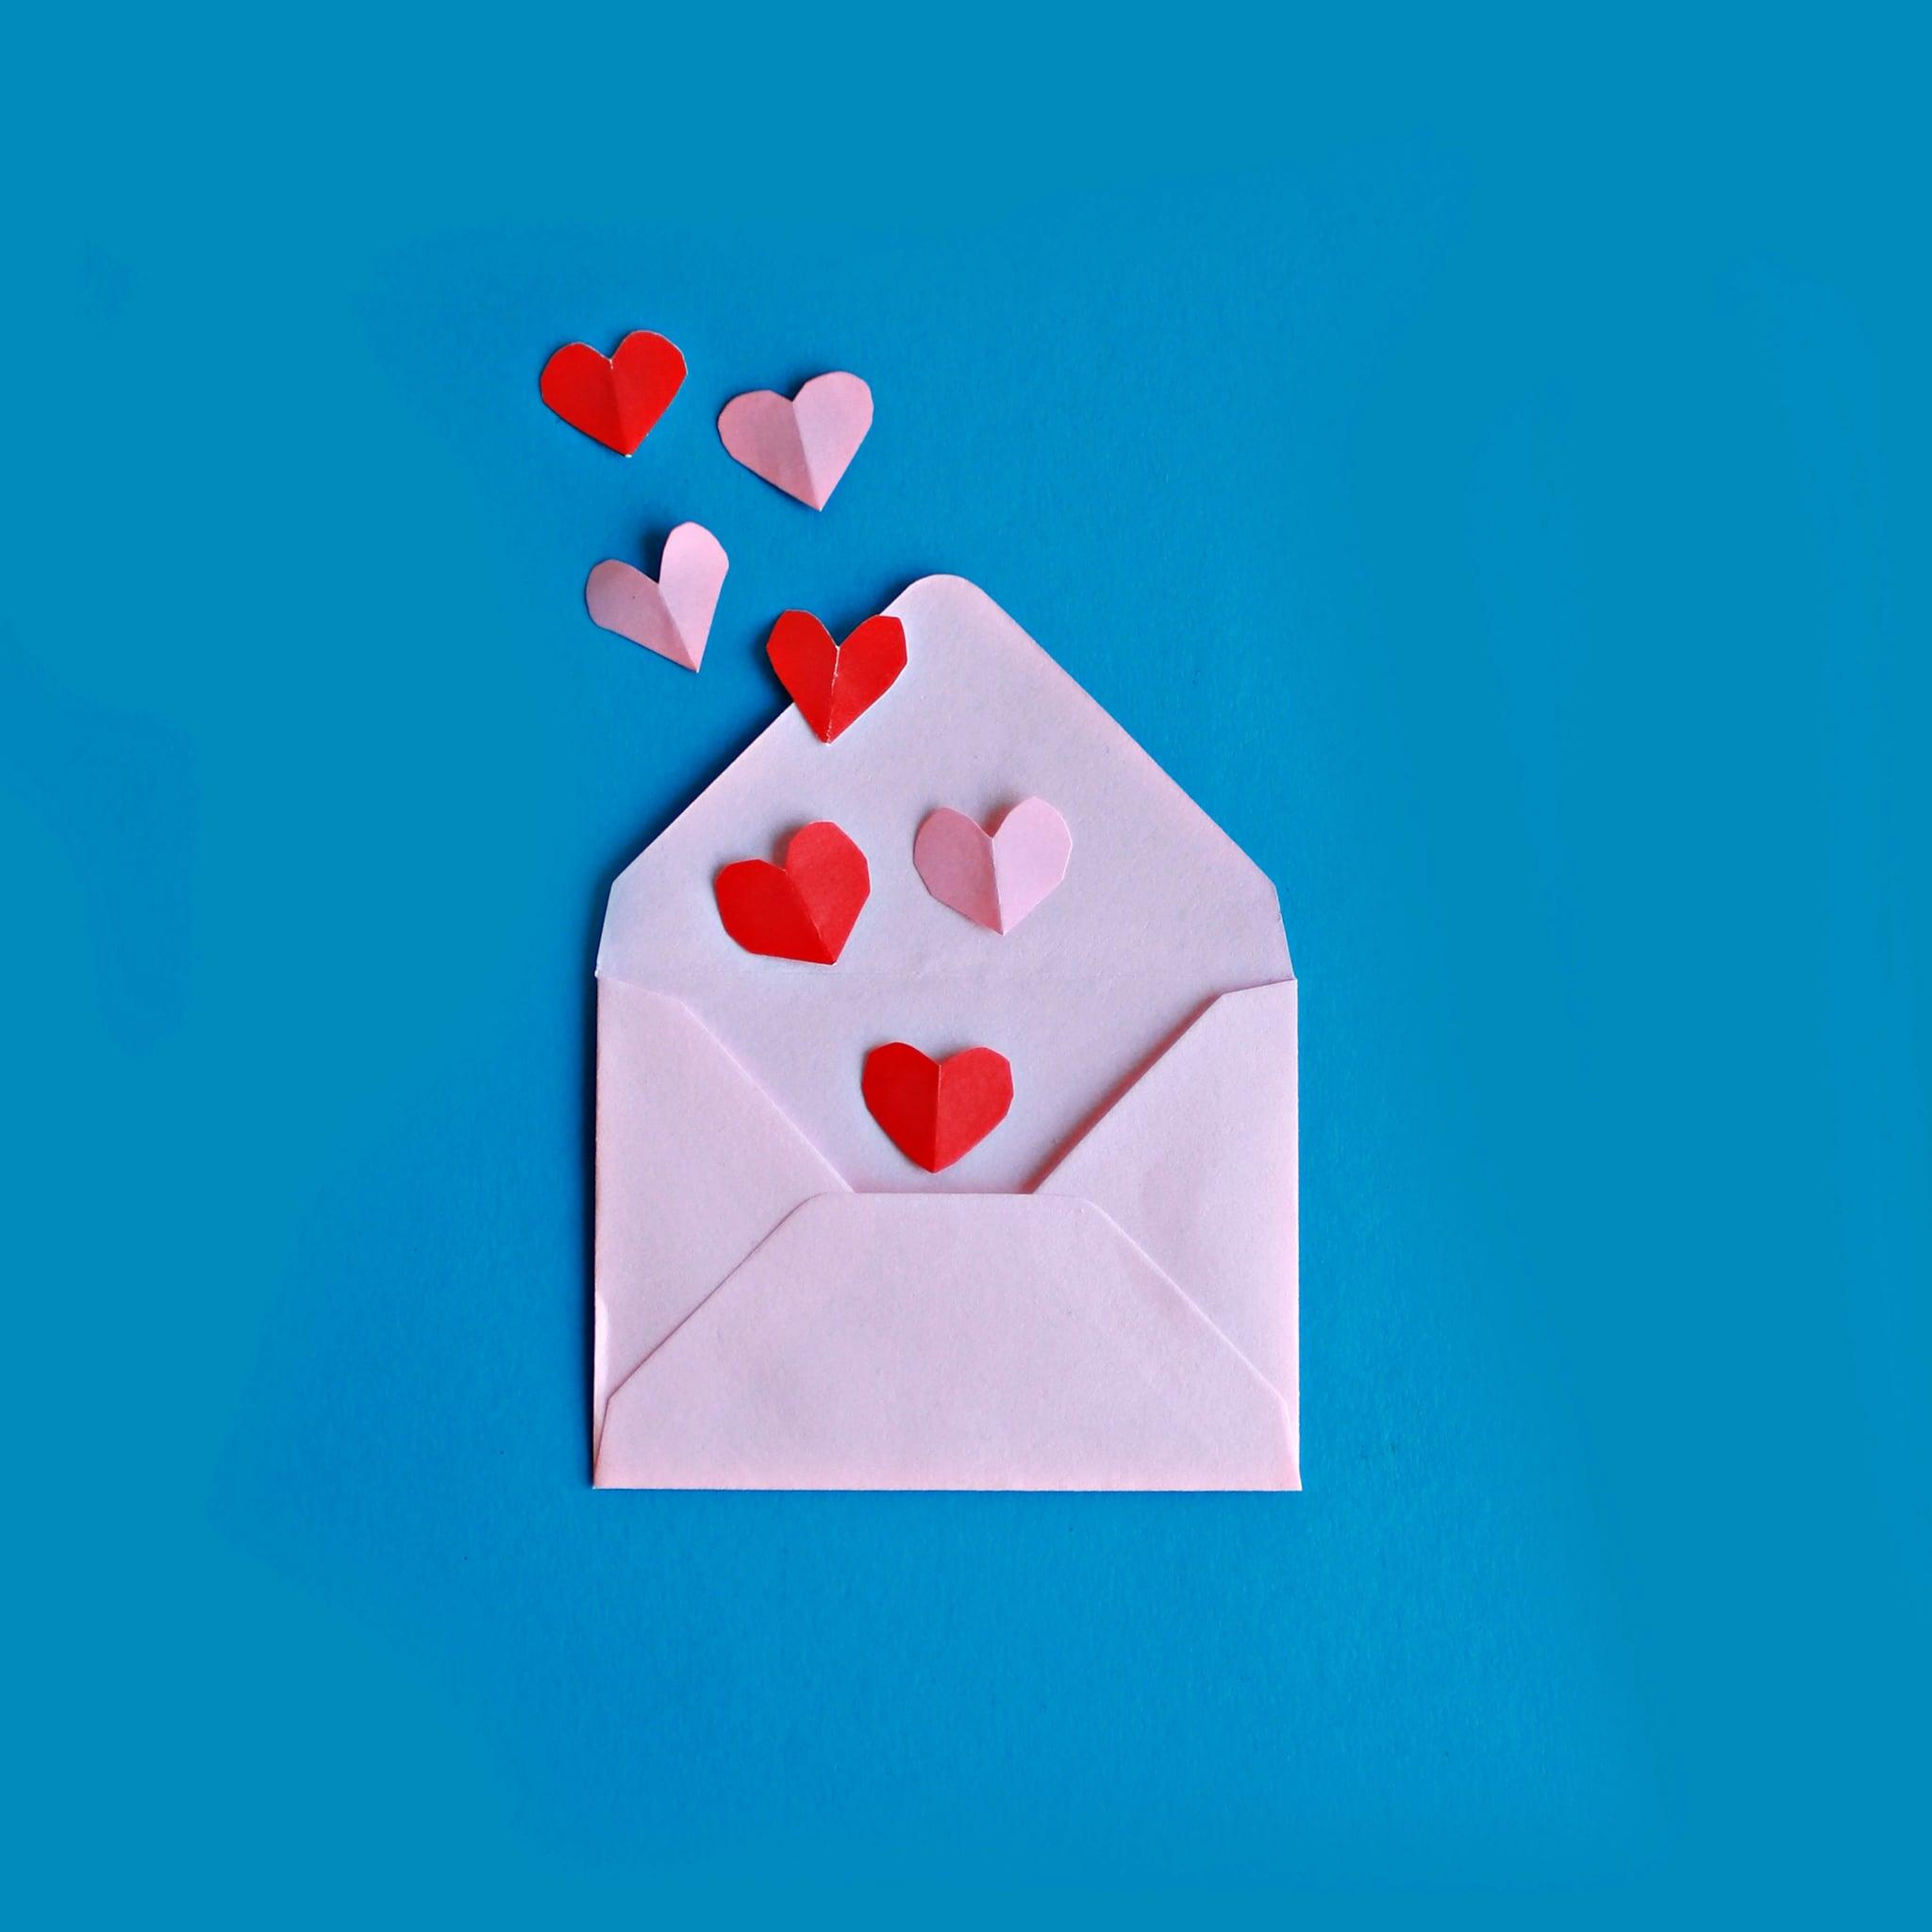 The Cutest Valentine's Day Wallpaper For Your Phone